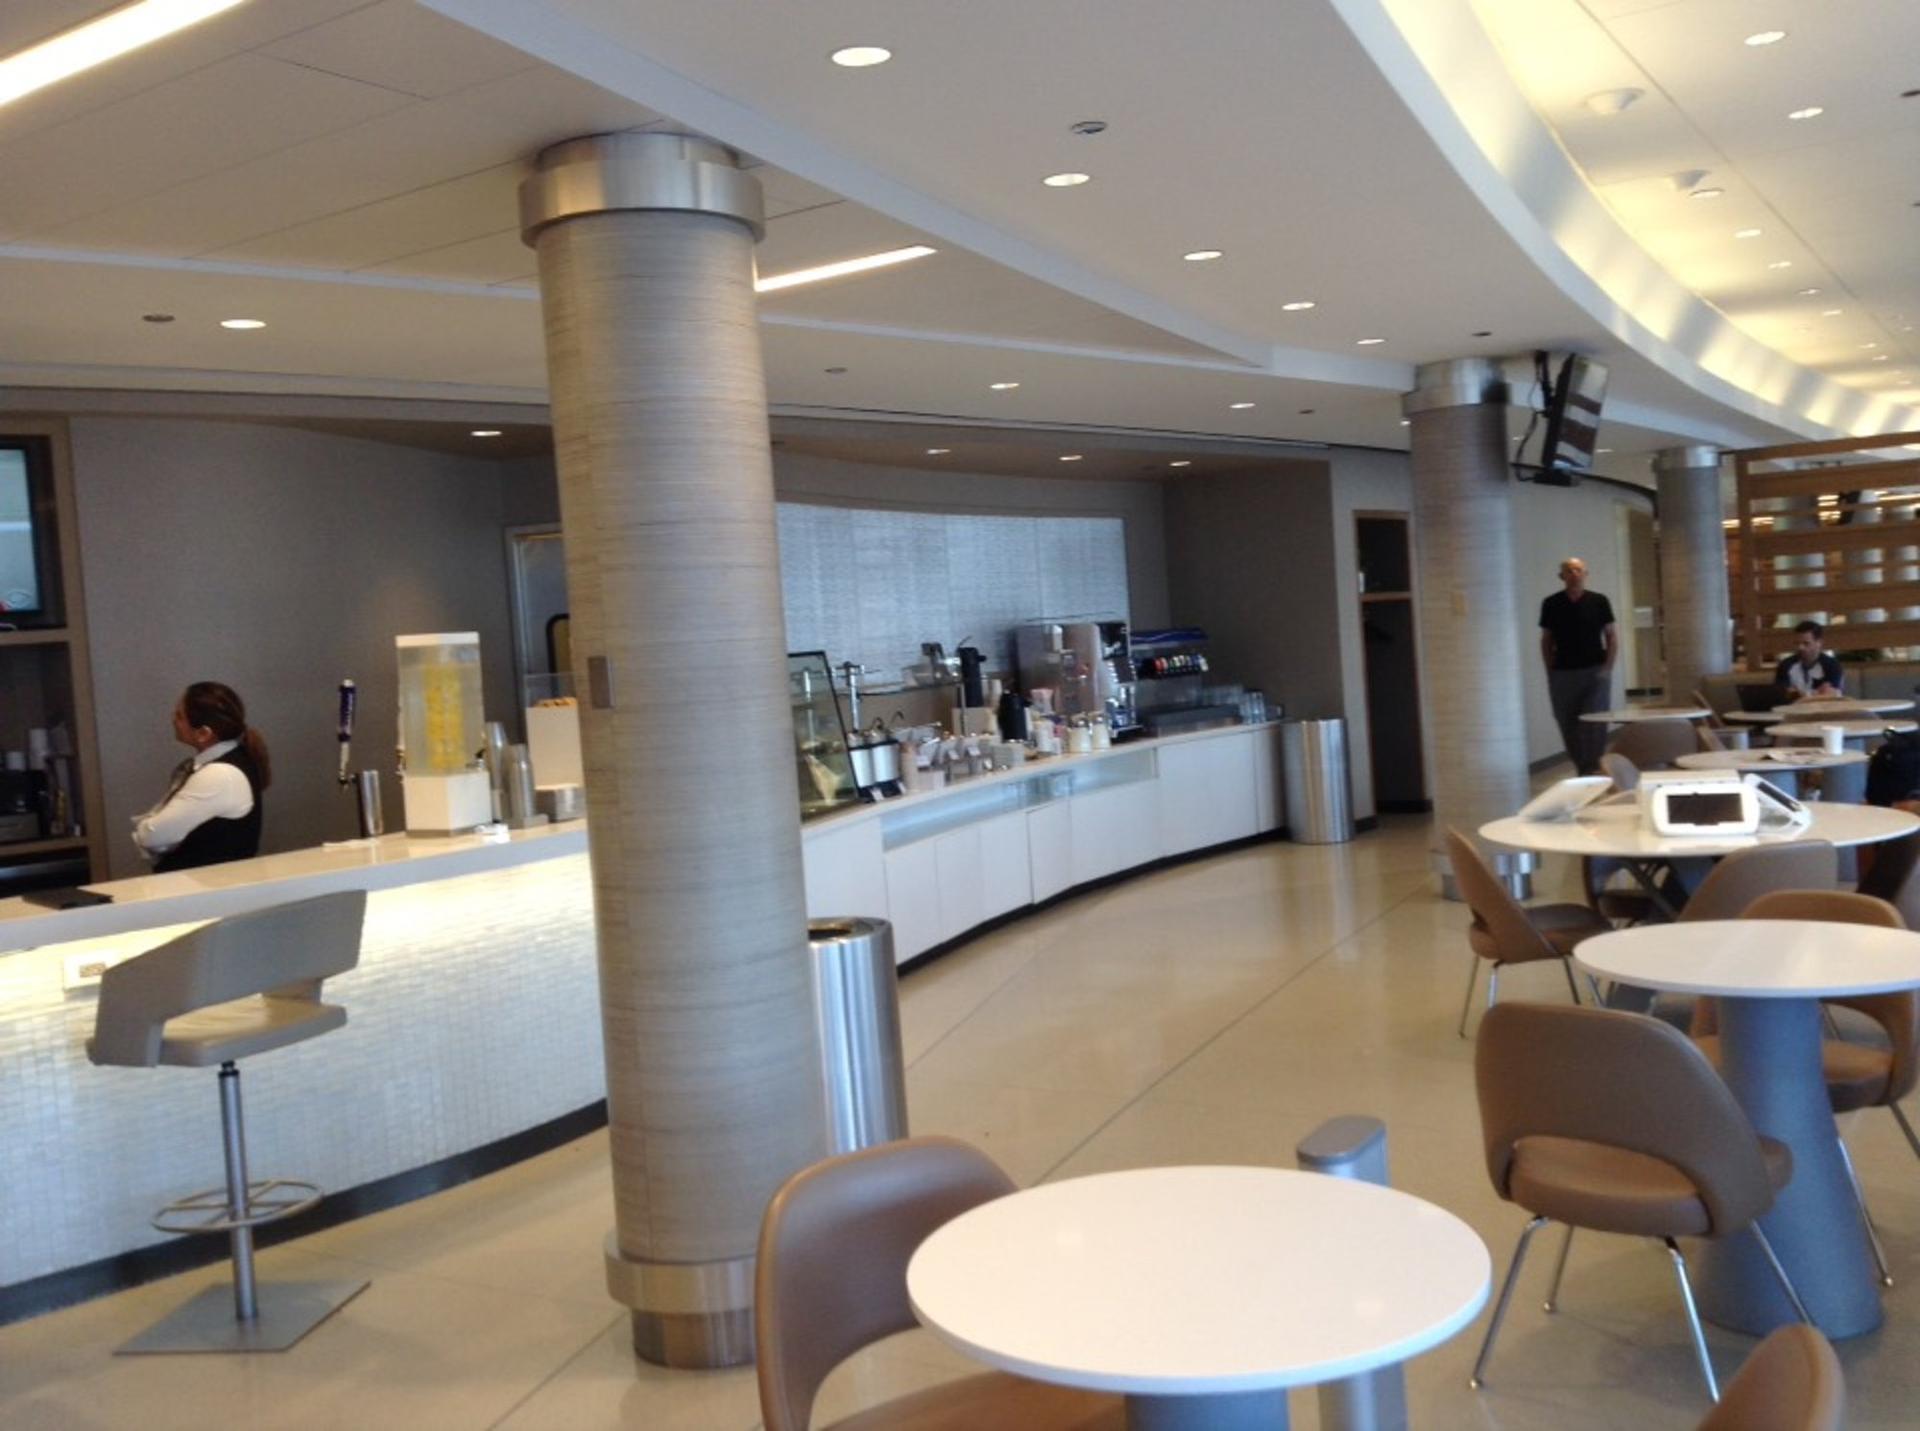 American Airlines Admirals Club image 37 of 50